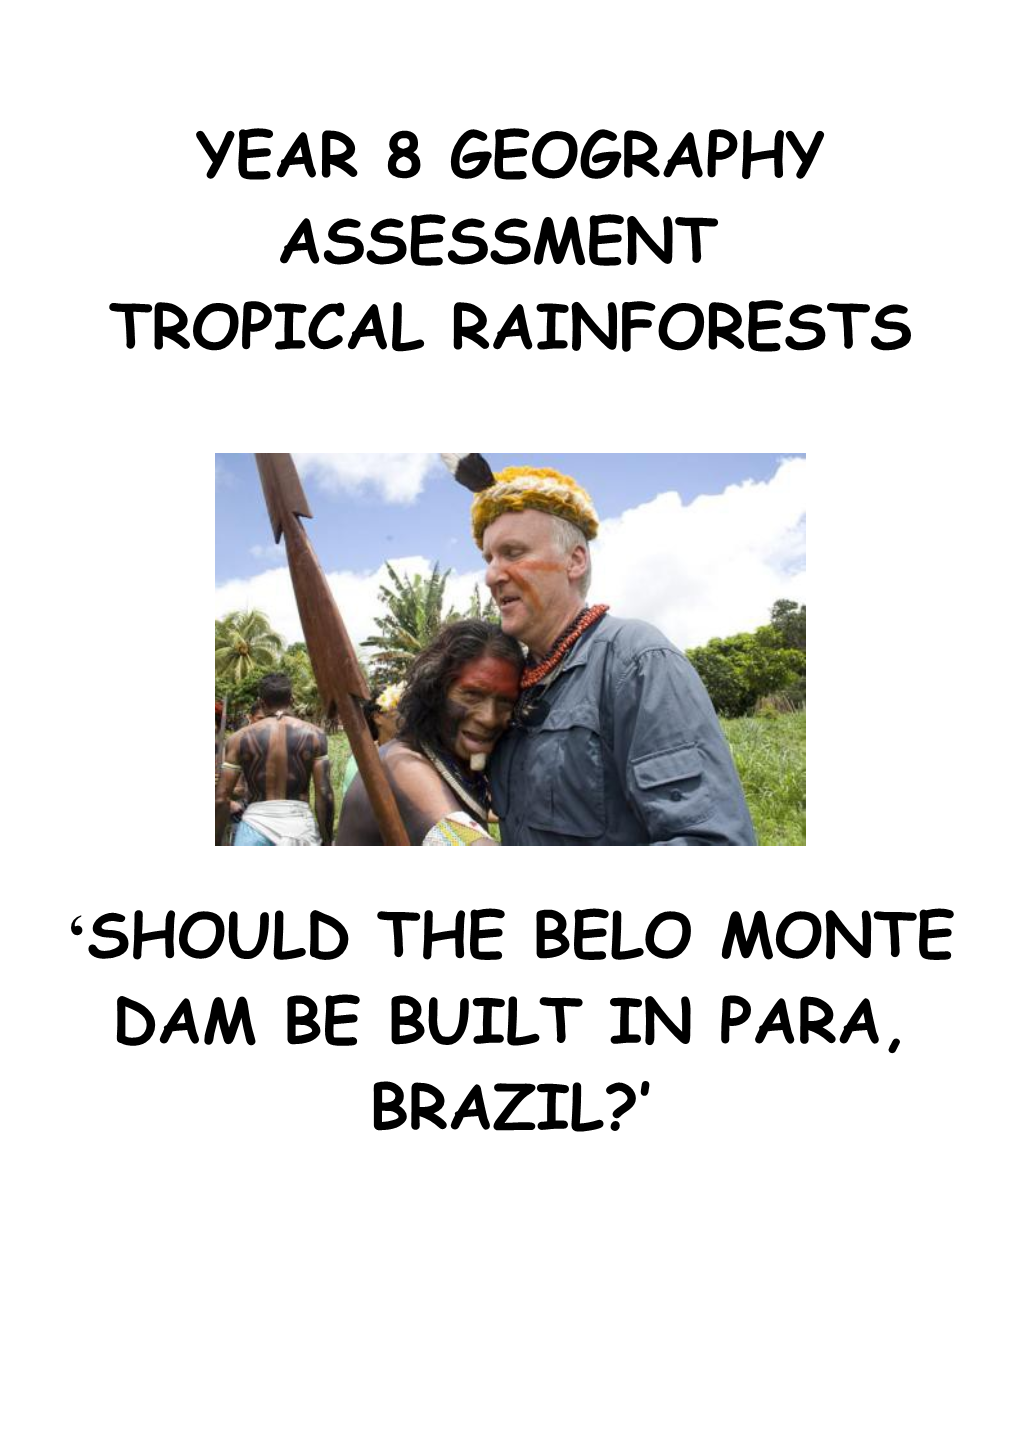 Should the Belo Monte Hydroelectric Dam Be Built in Para, Brazil